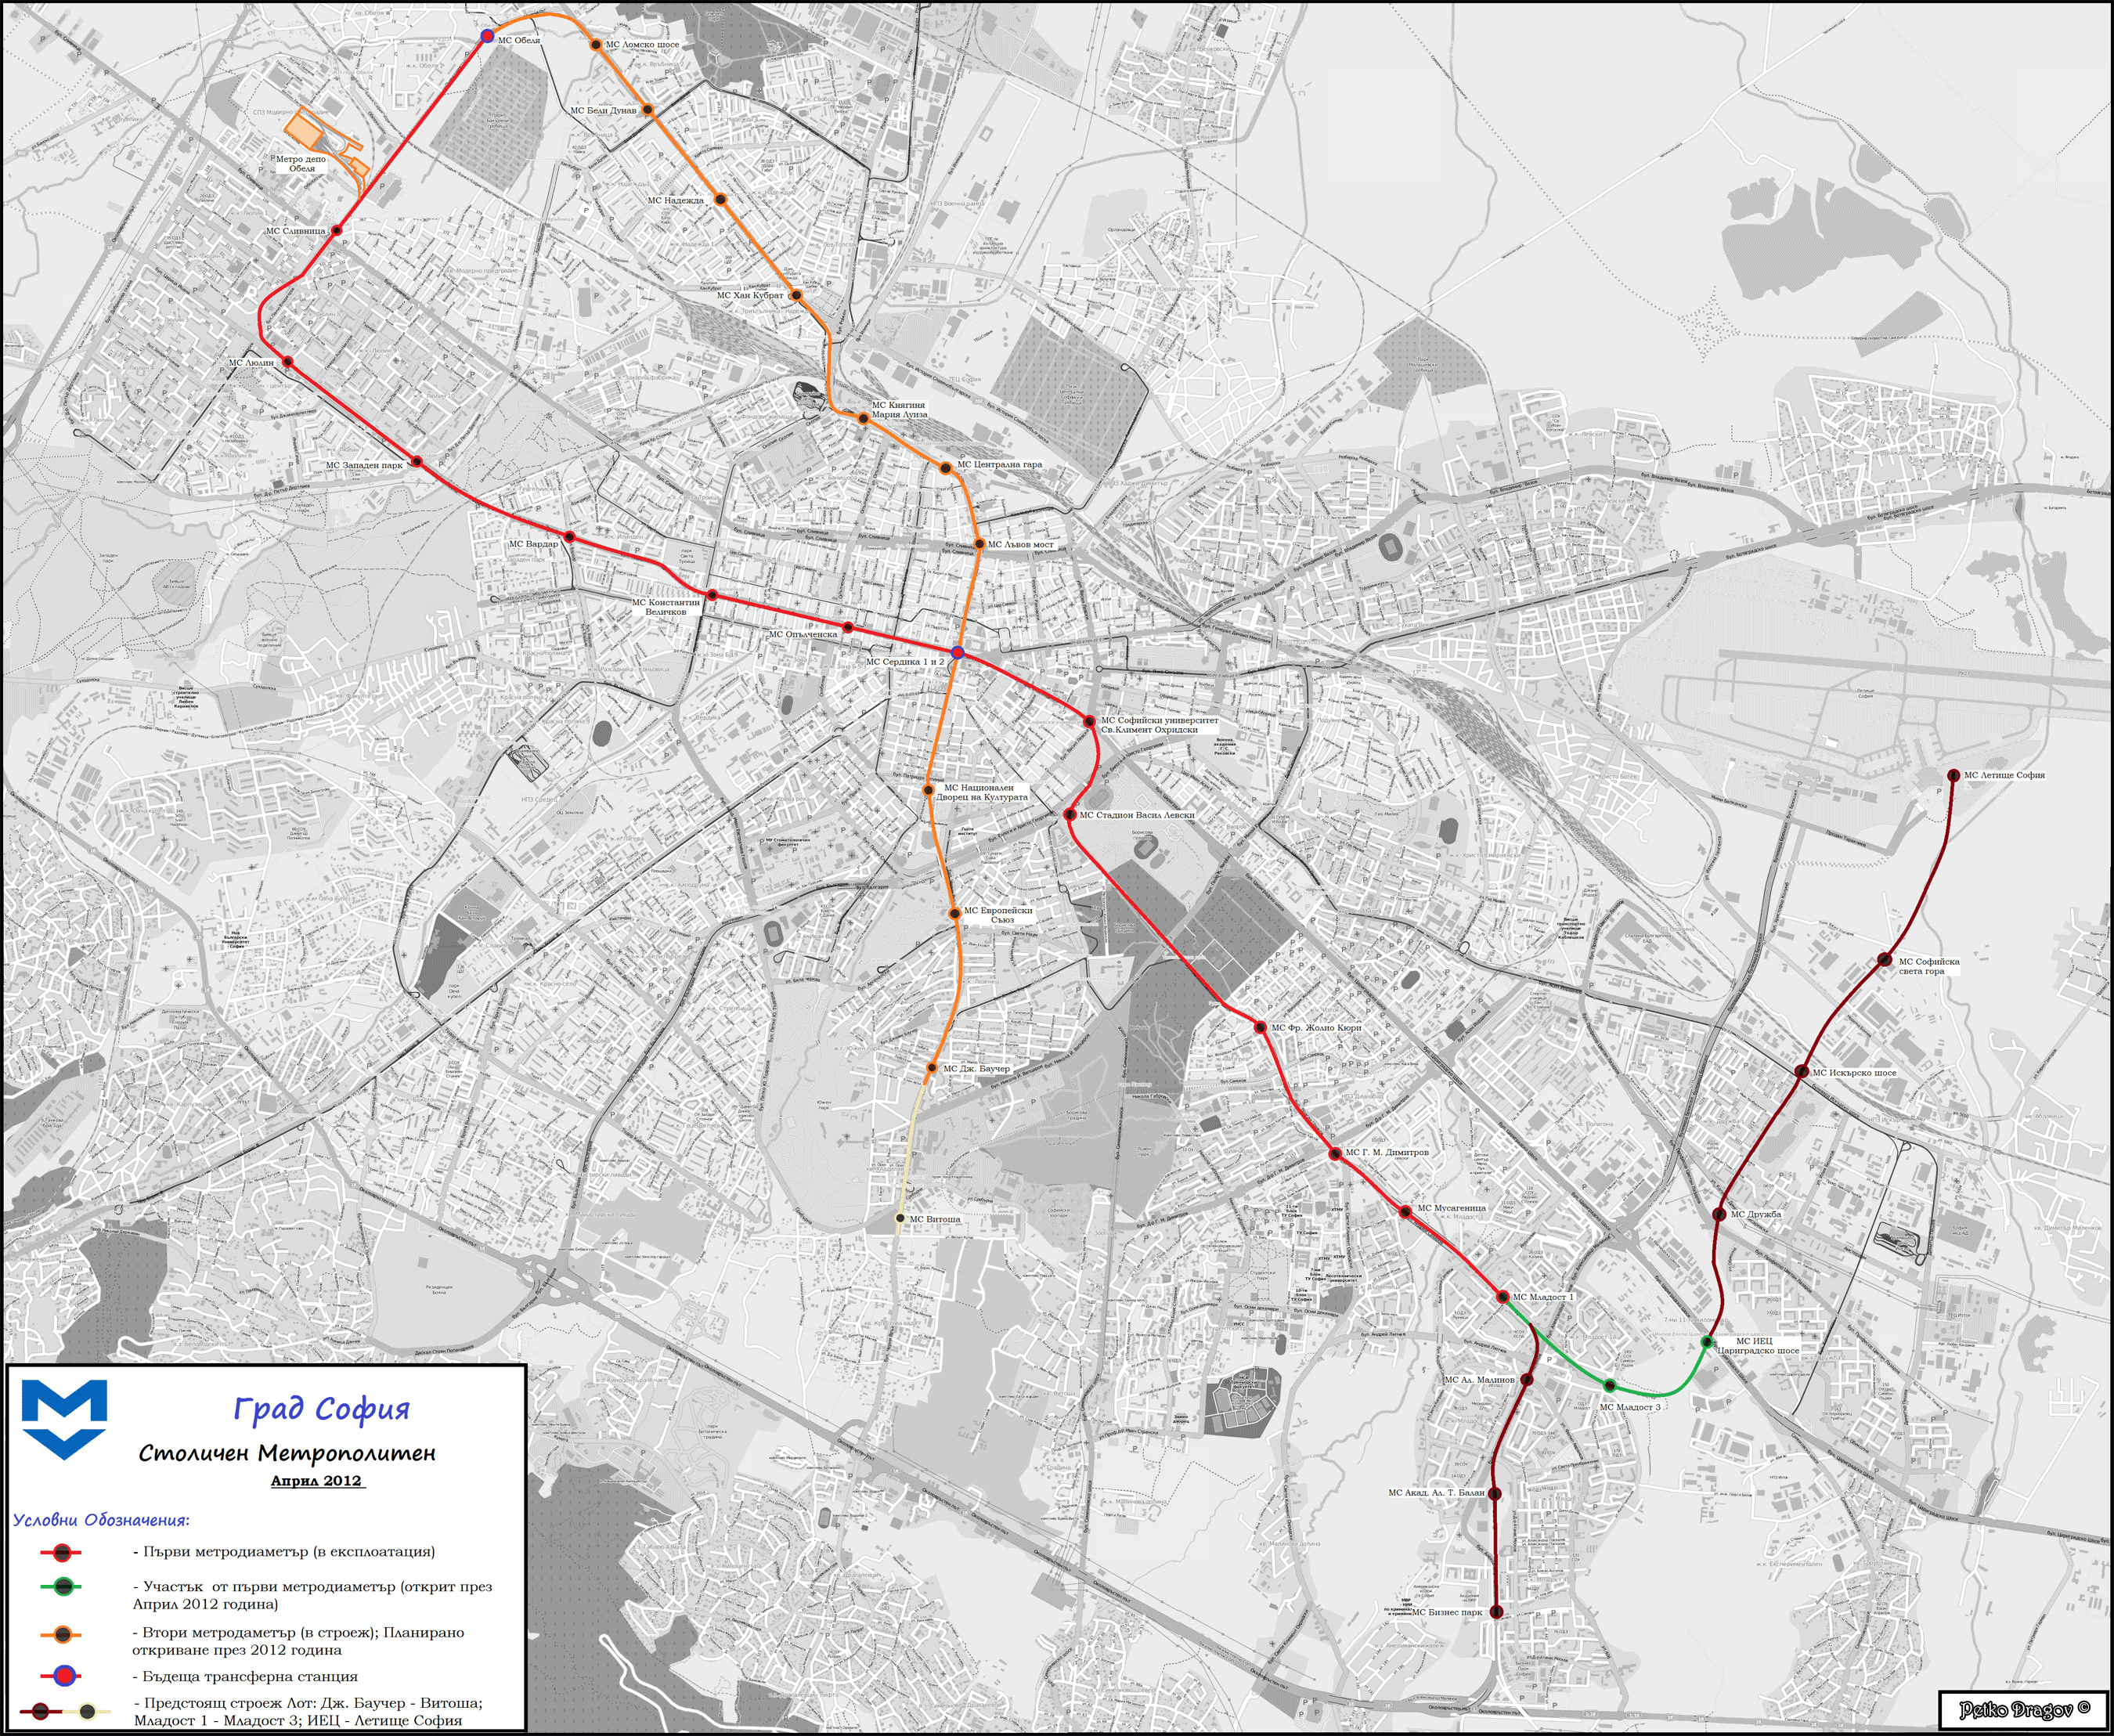 Sofia — General schemes — Metropolitan; Maps made with OpenStreetMap